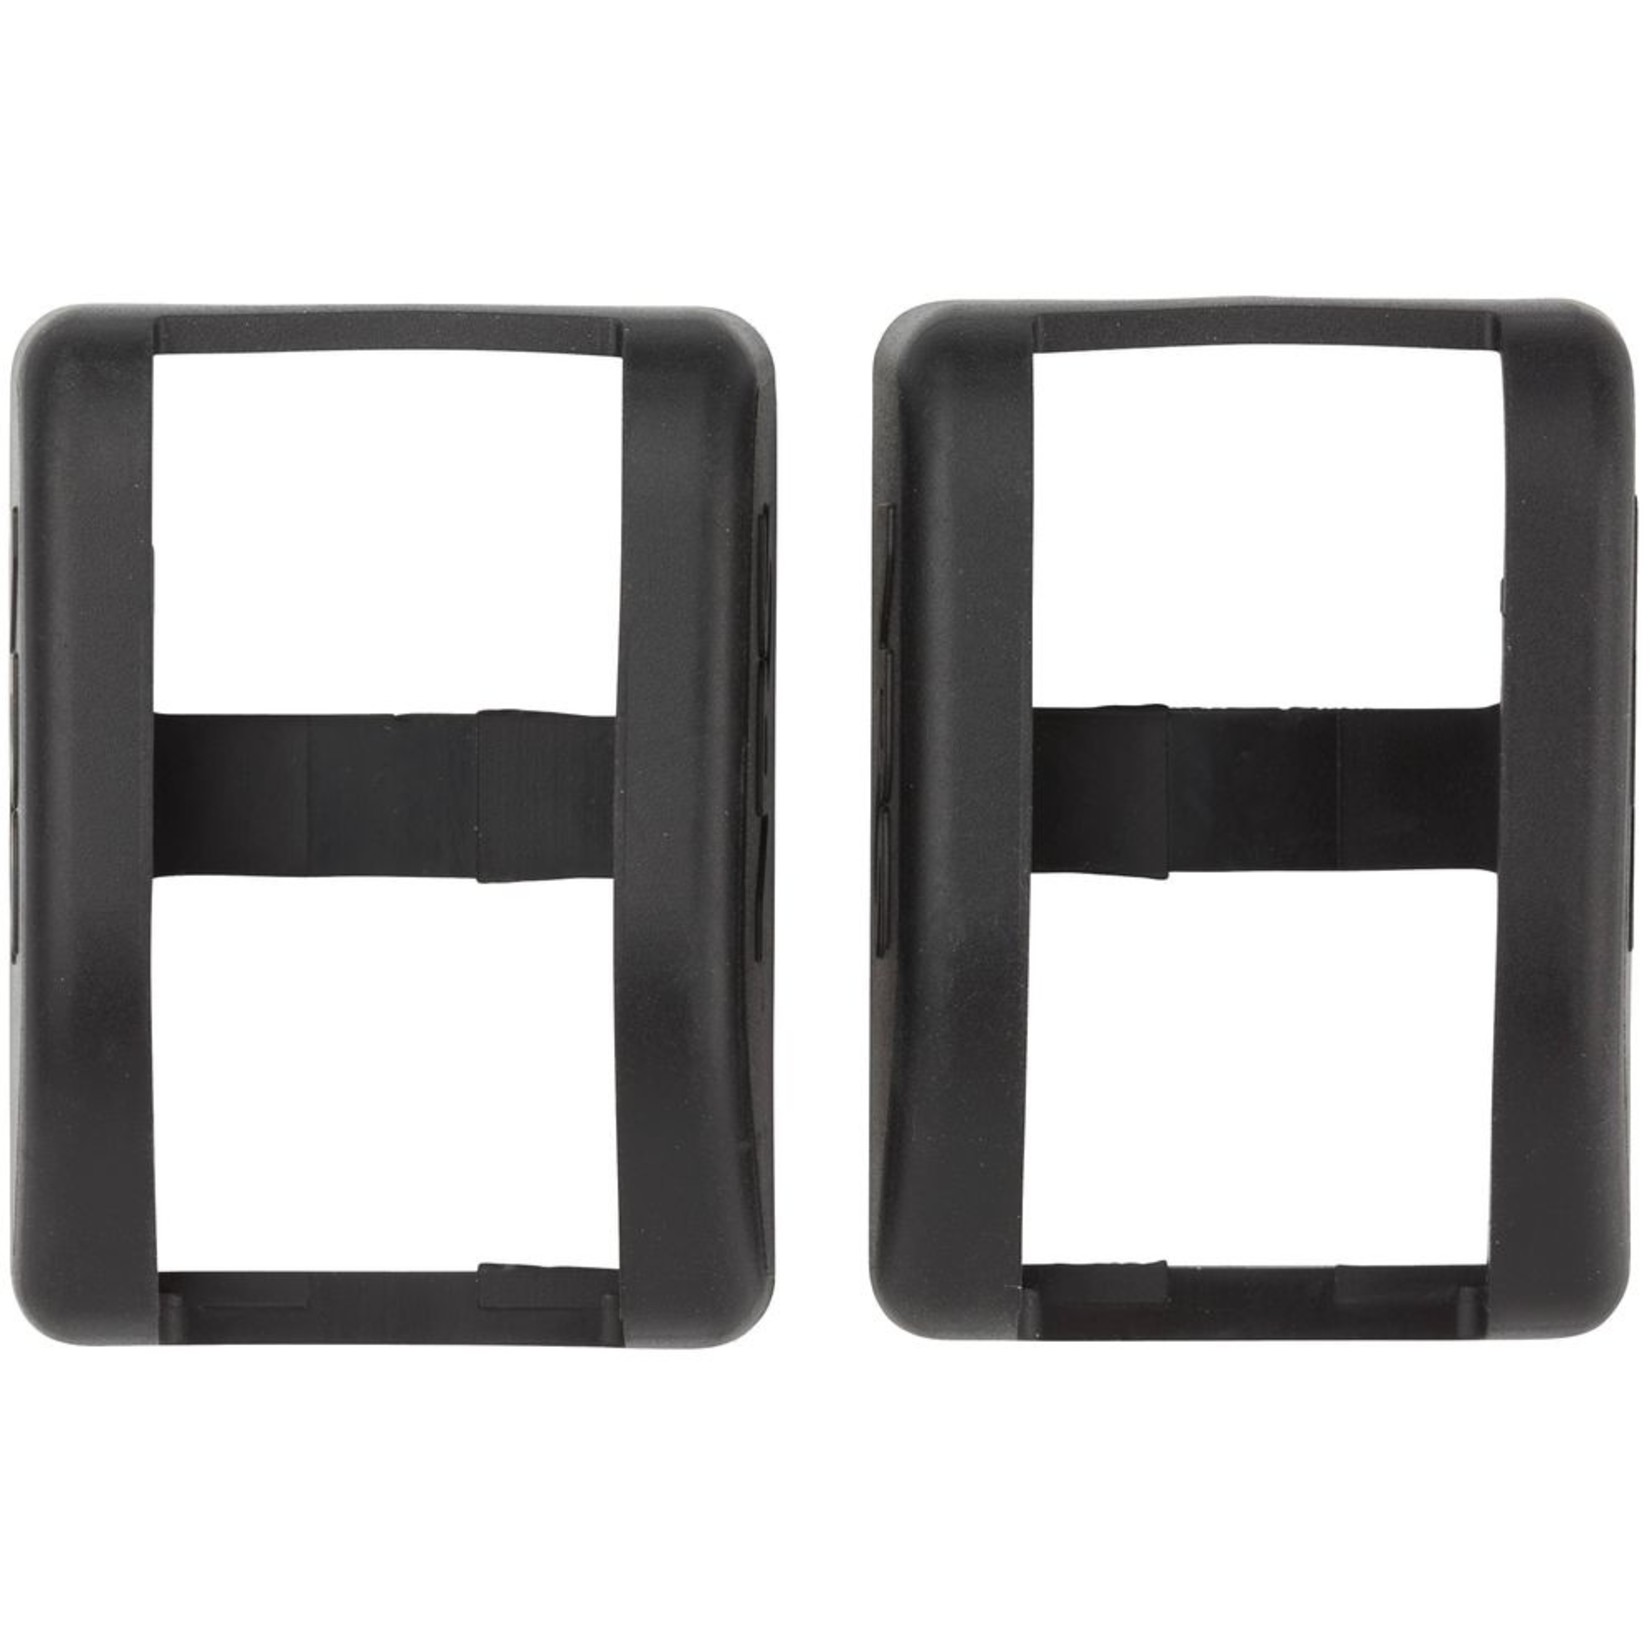 NRS, Inc NRS Buckle Bumpers for 1" Straps